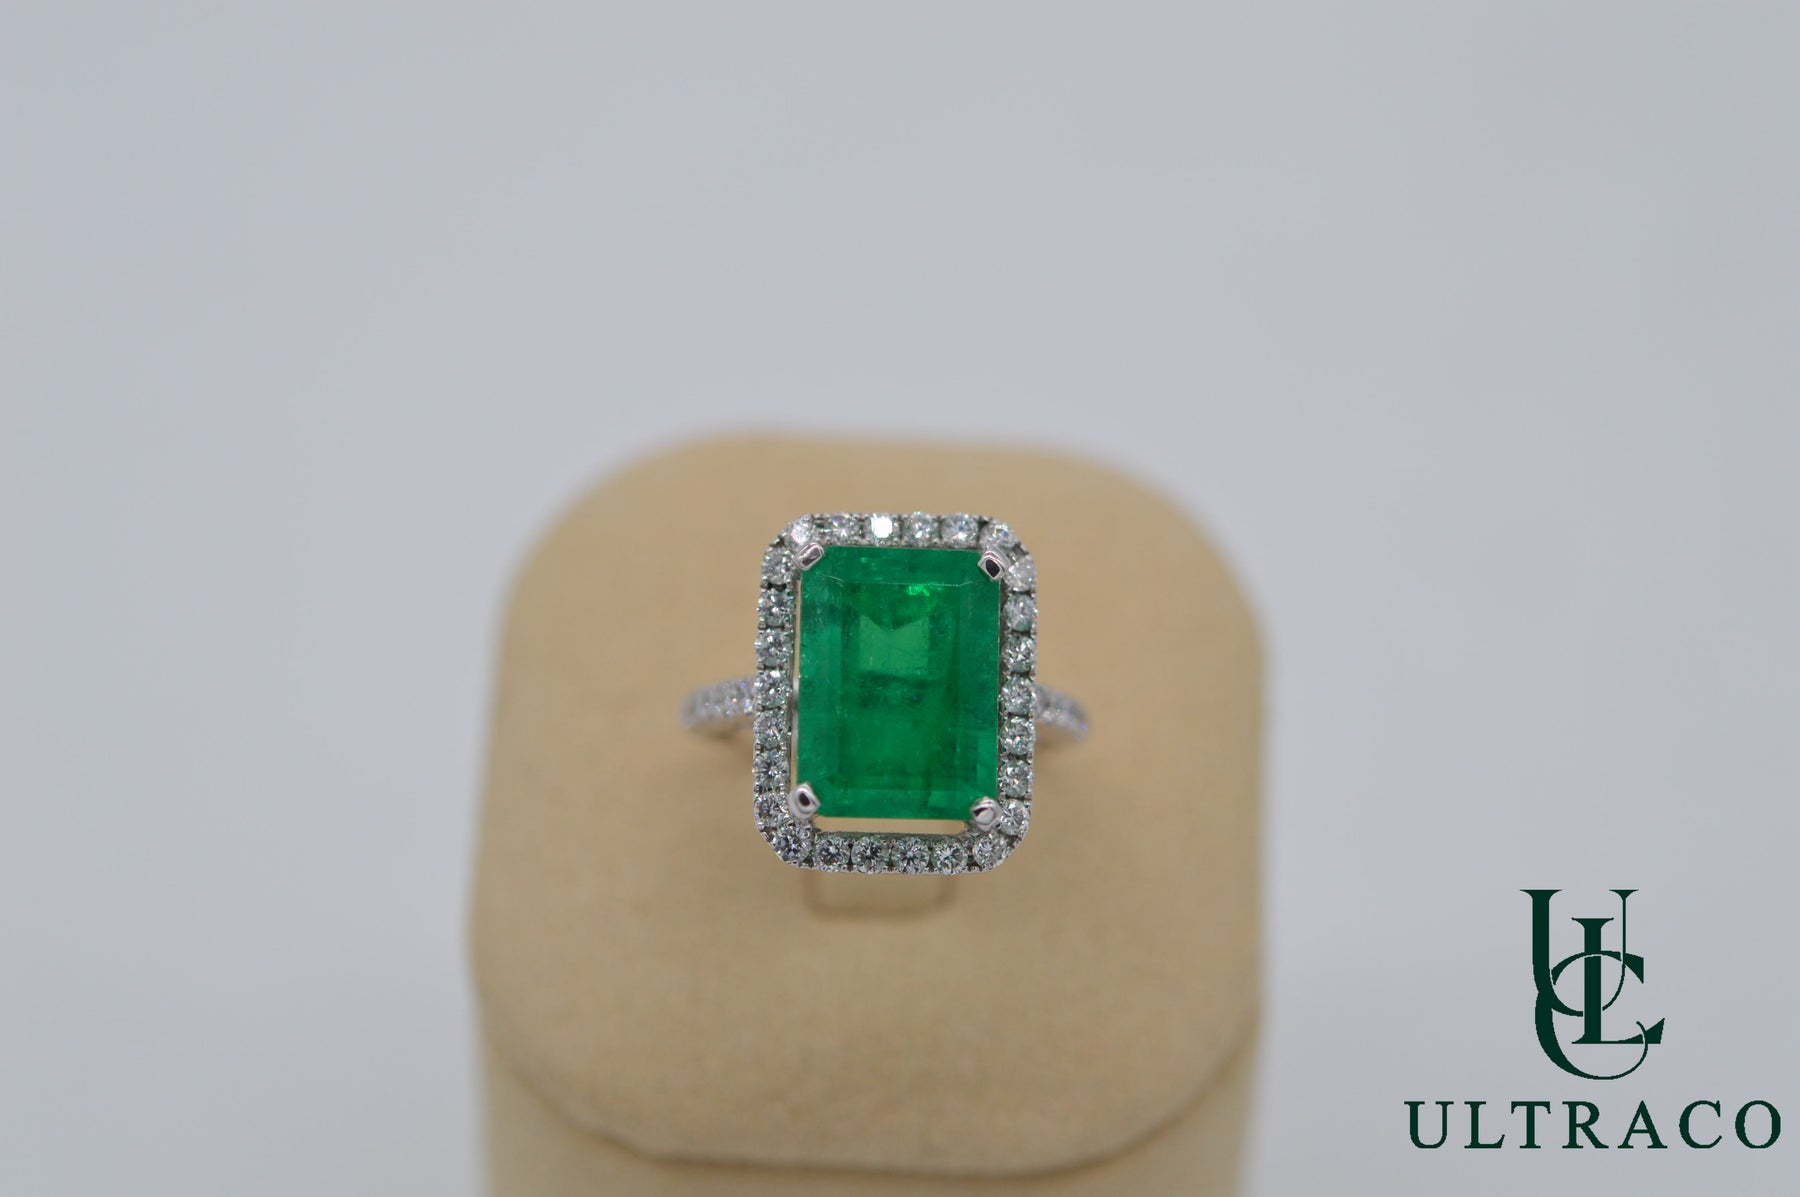 Colombian Emerald With Diamonds Set In 18K White Gold Ring